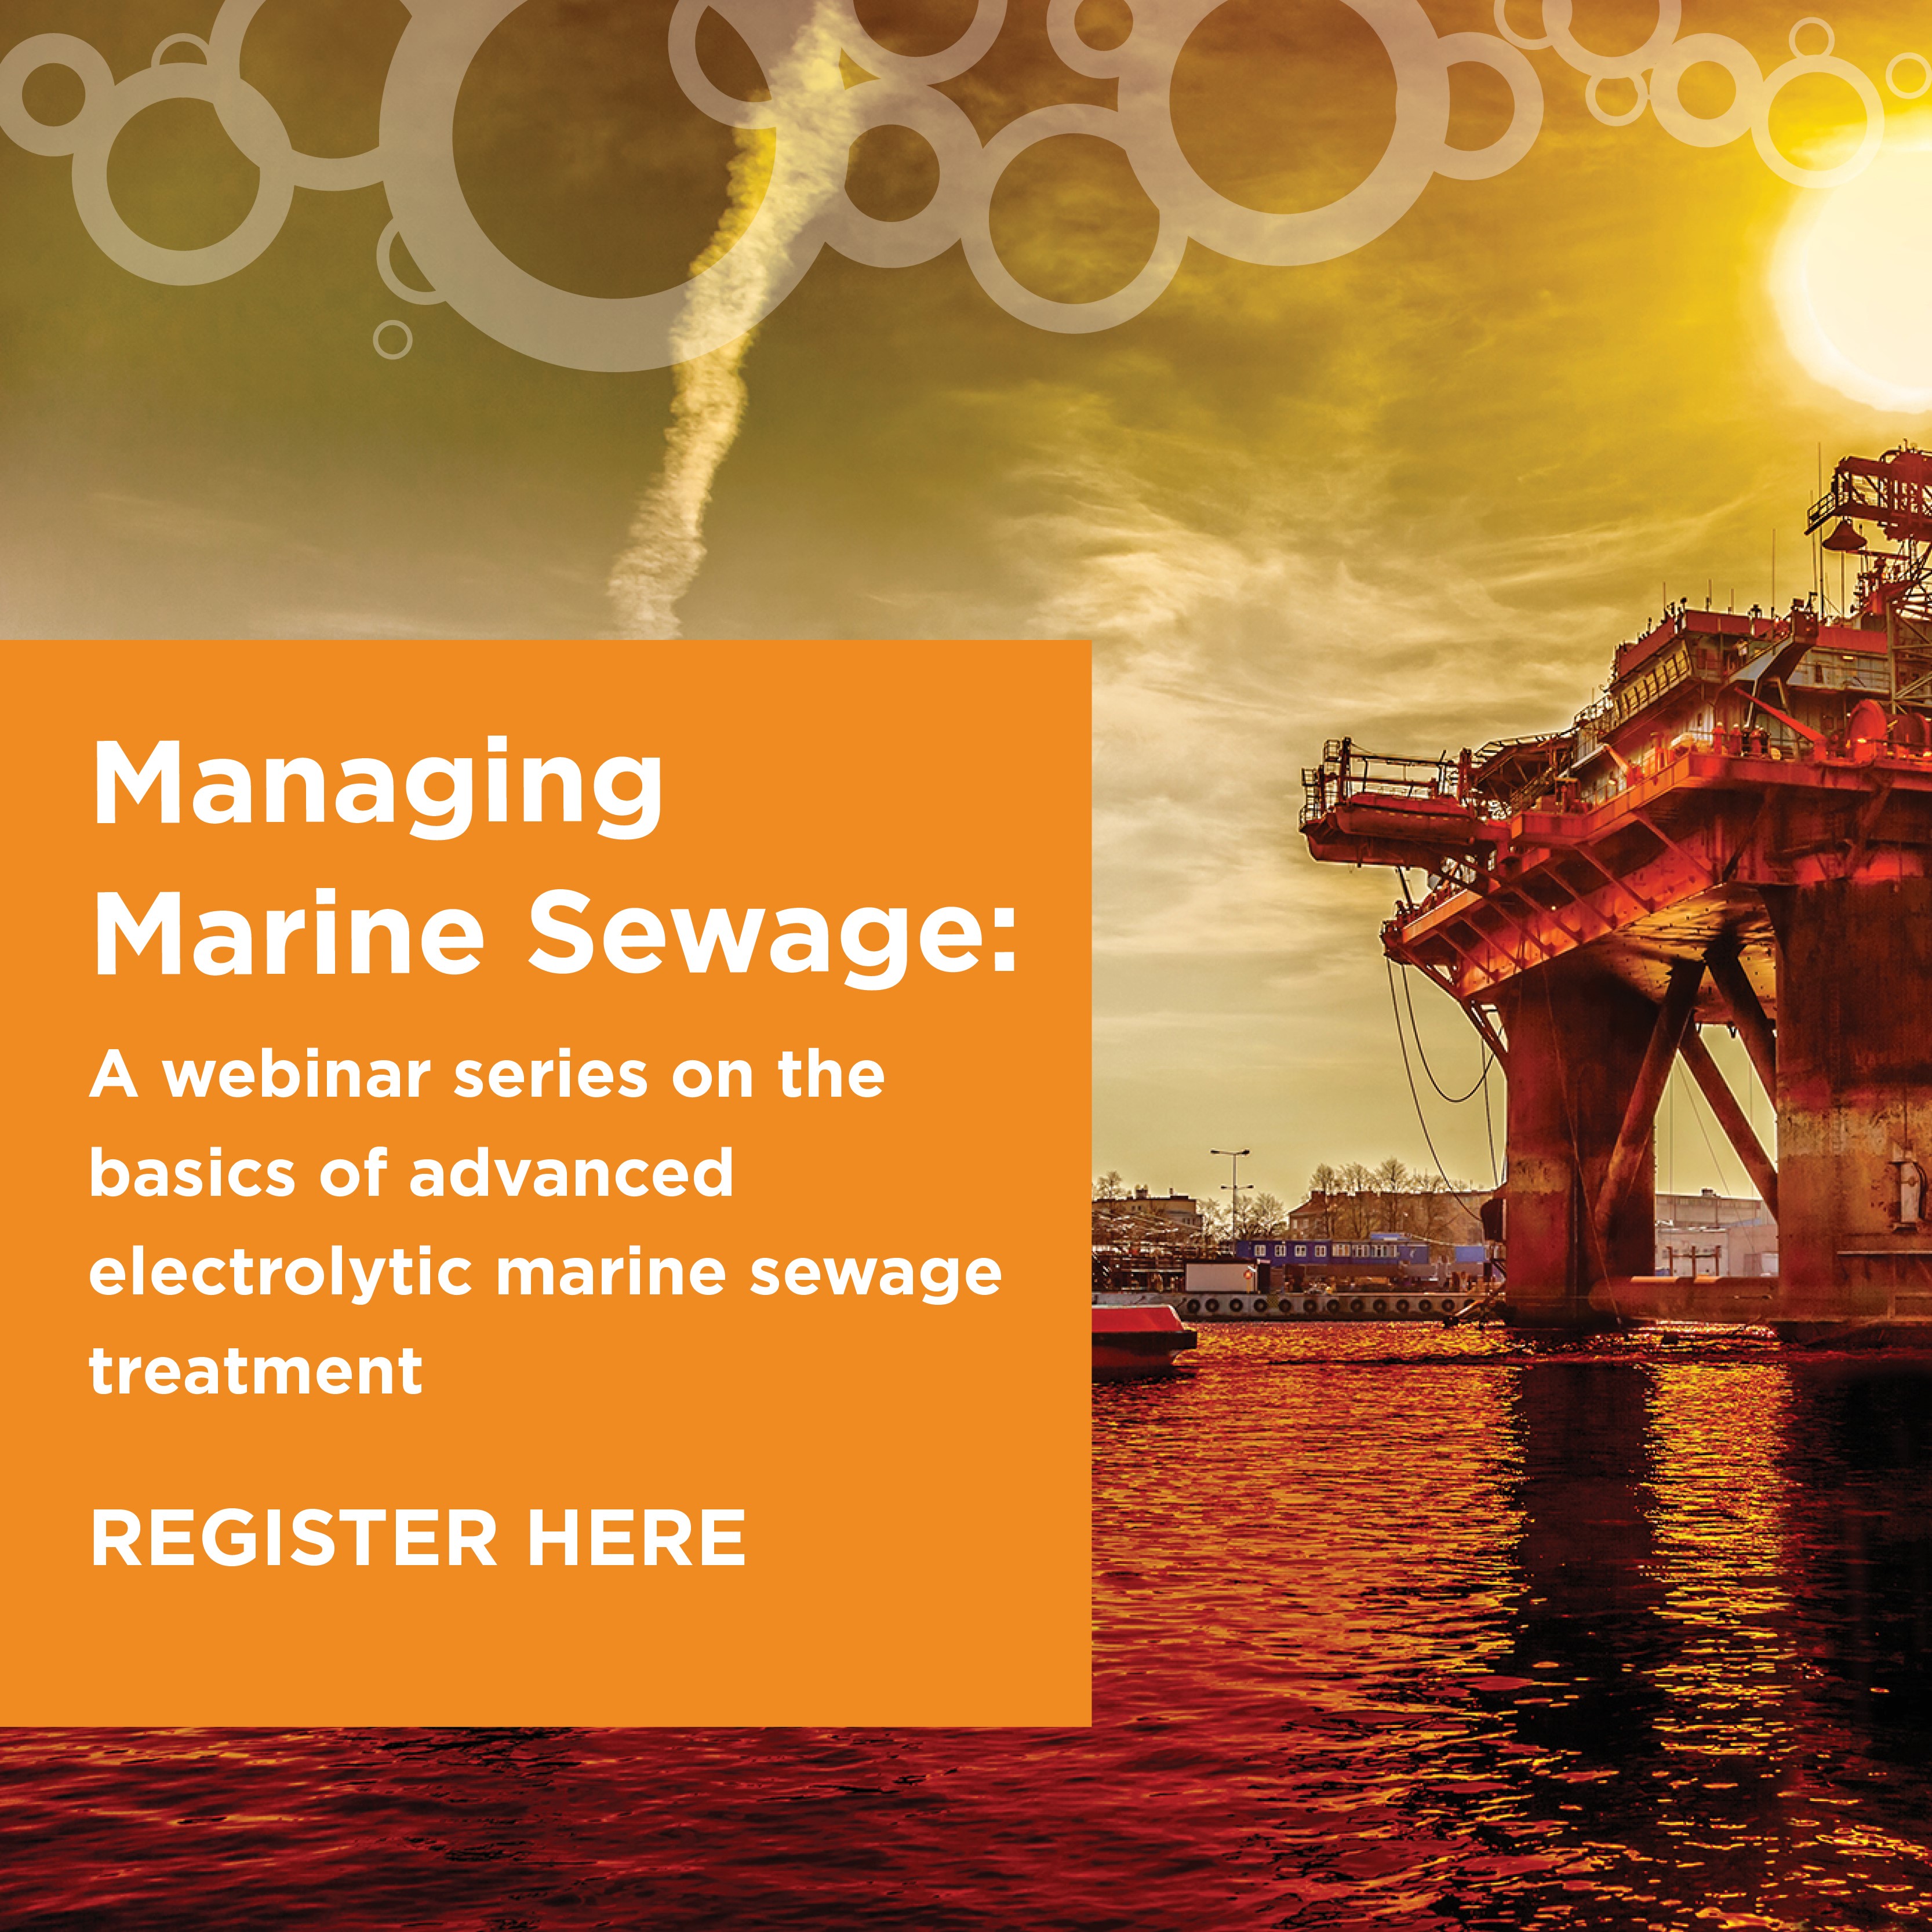 NEW Webinar Addition: Innovative solutions for offshore oil and gas